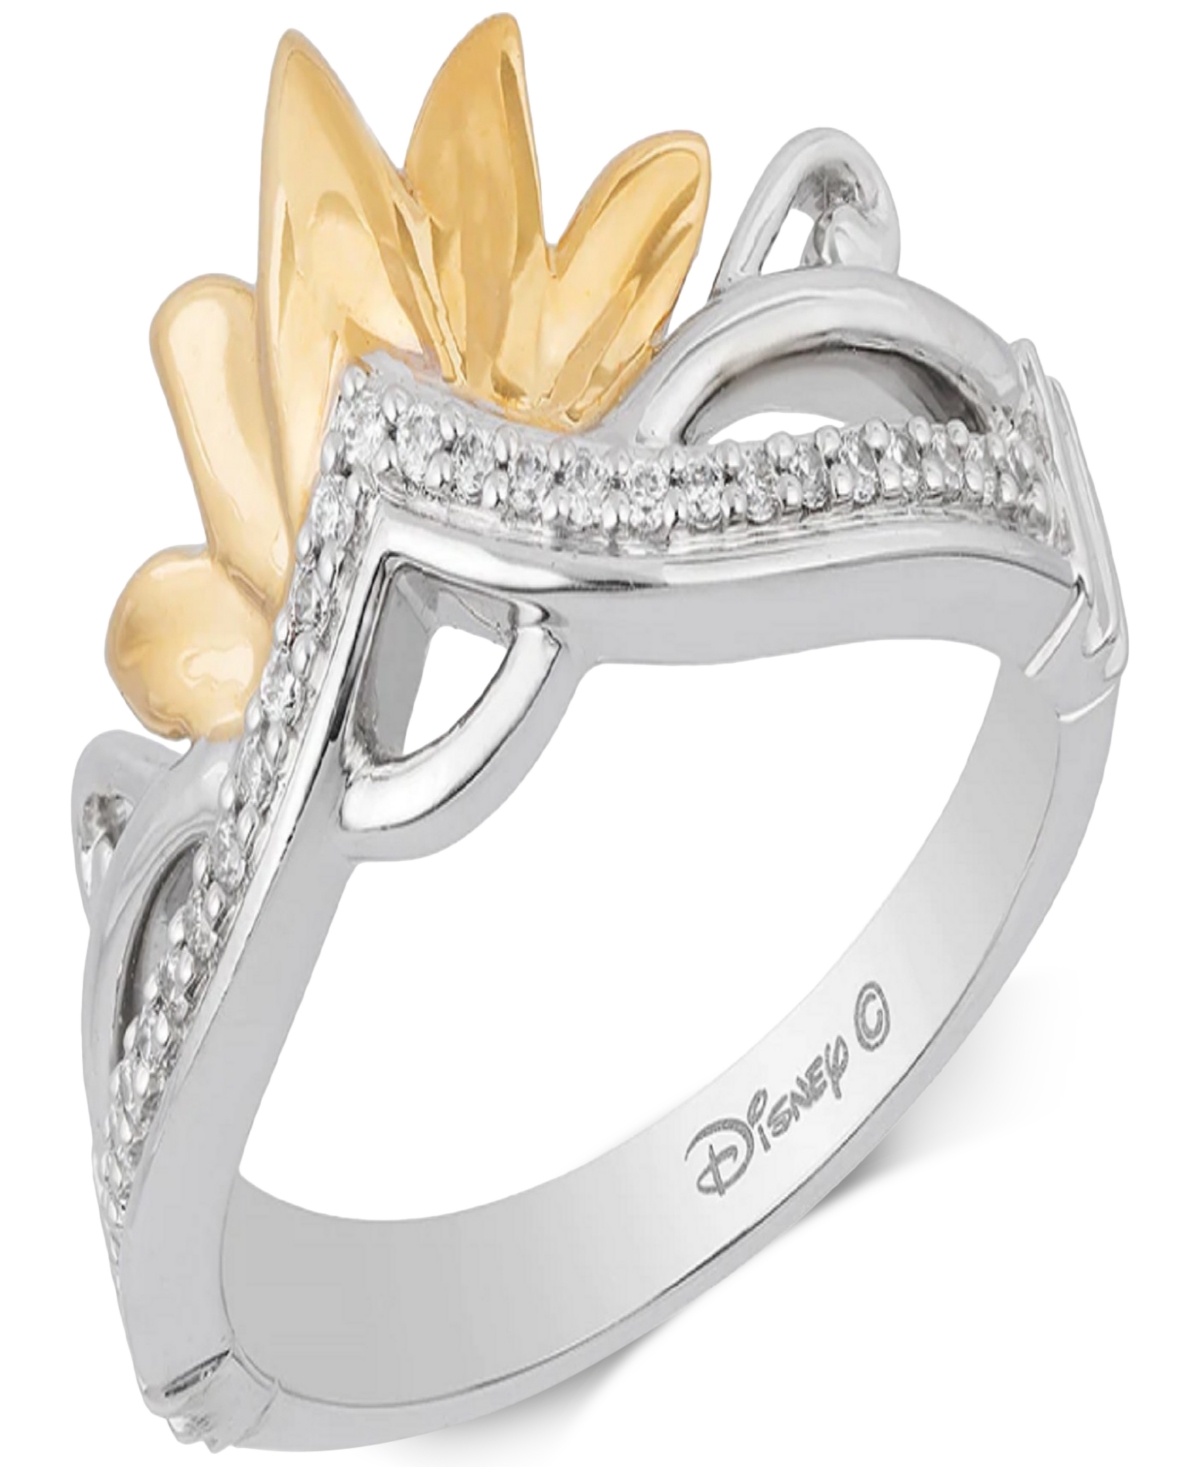 Diamond Tiana Ring (1/10 ct. t.w.) in Sterling Silver & 10k Gold - Two Tone